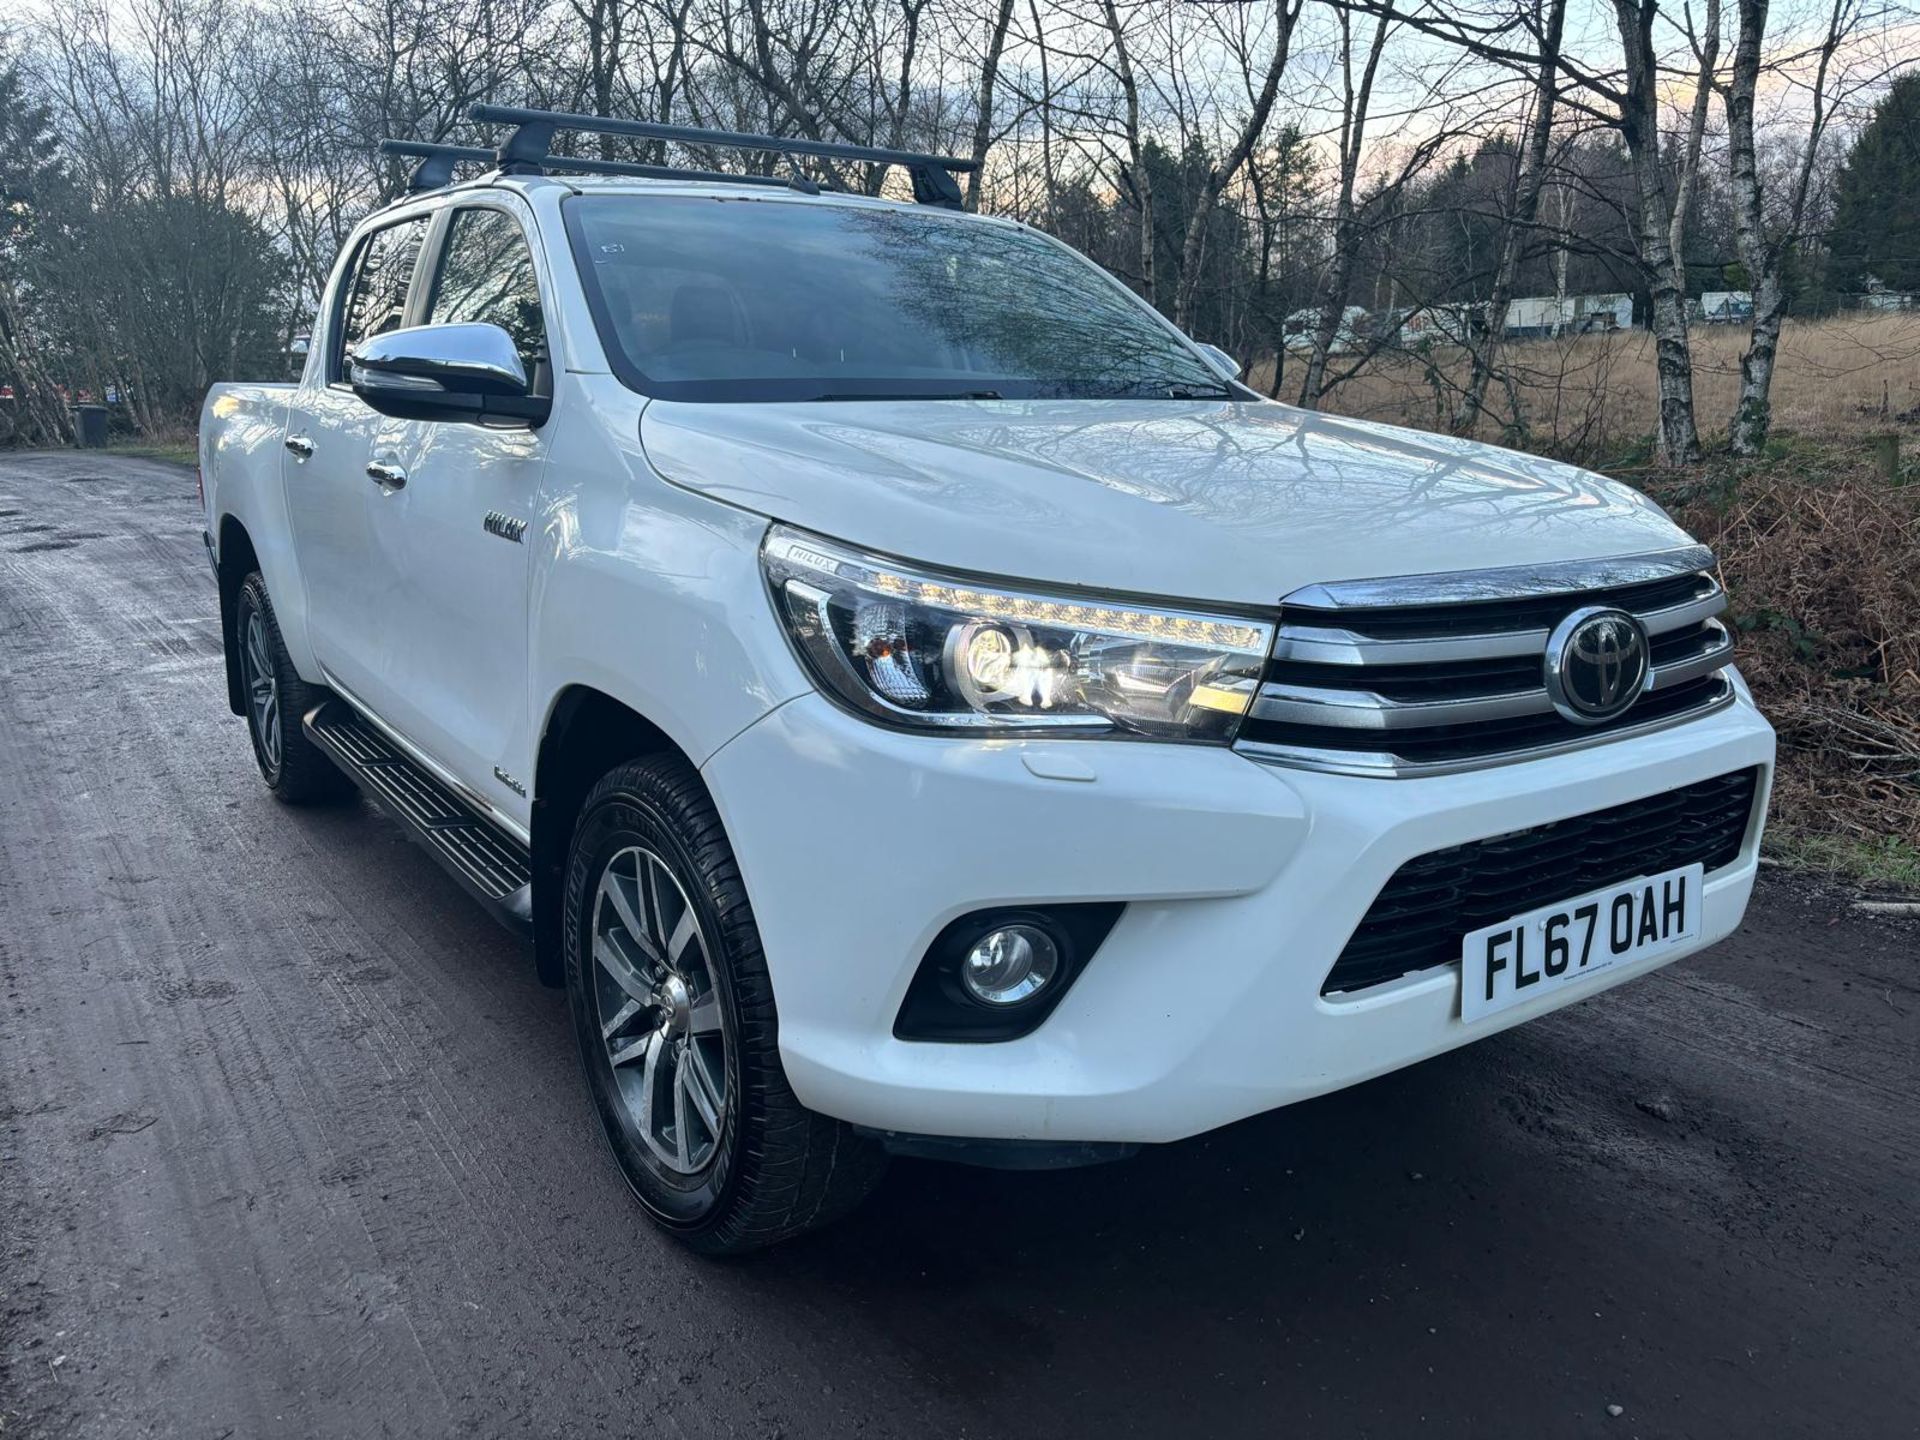 2018 TOYOTA HILUX INVINCIBLE DOUBLE CAB PICKUP TRUCK - Image 2 of 10